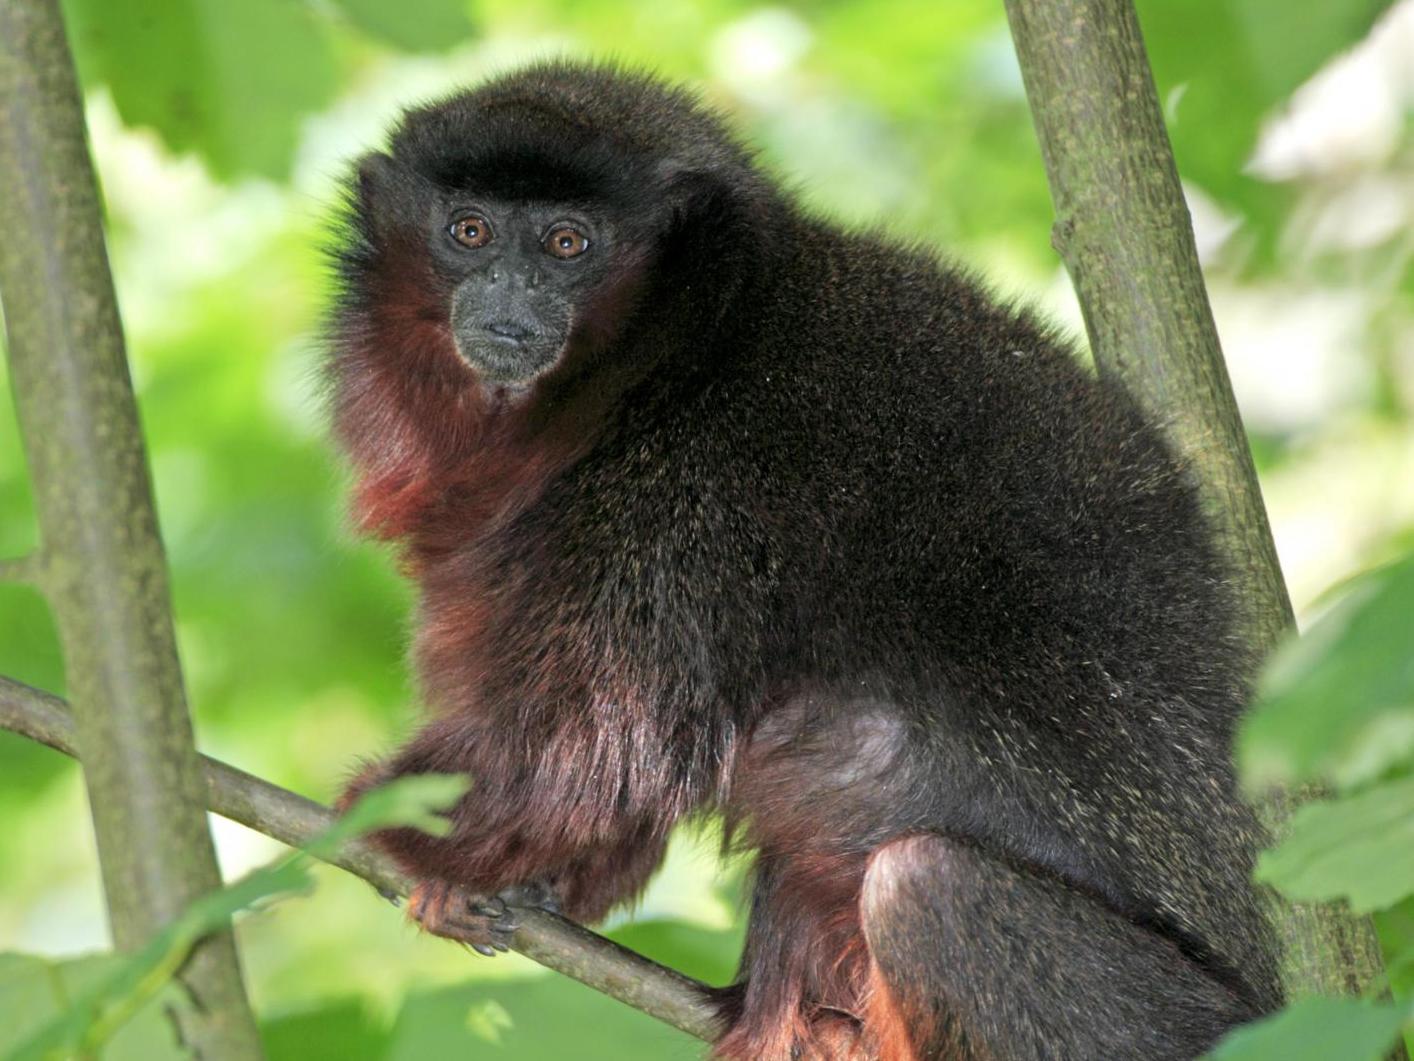 The newly-named species is similar to the dusky titi monkey which is also found in Brazil